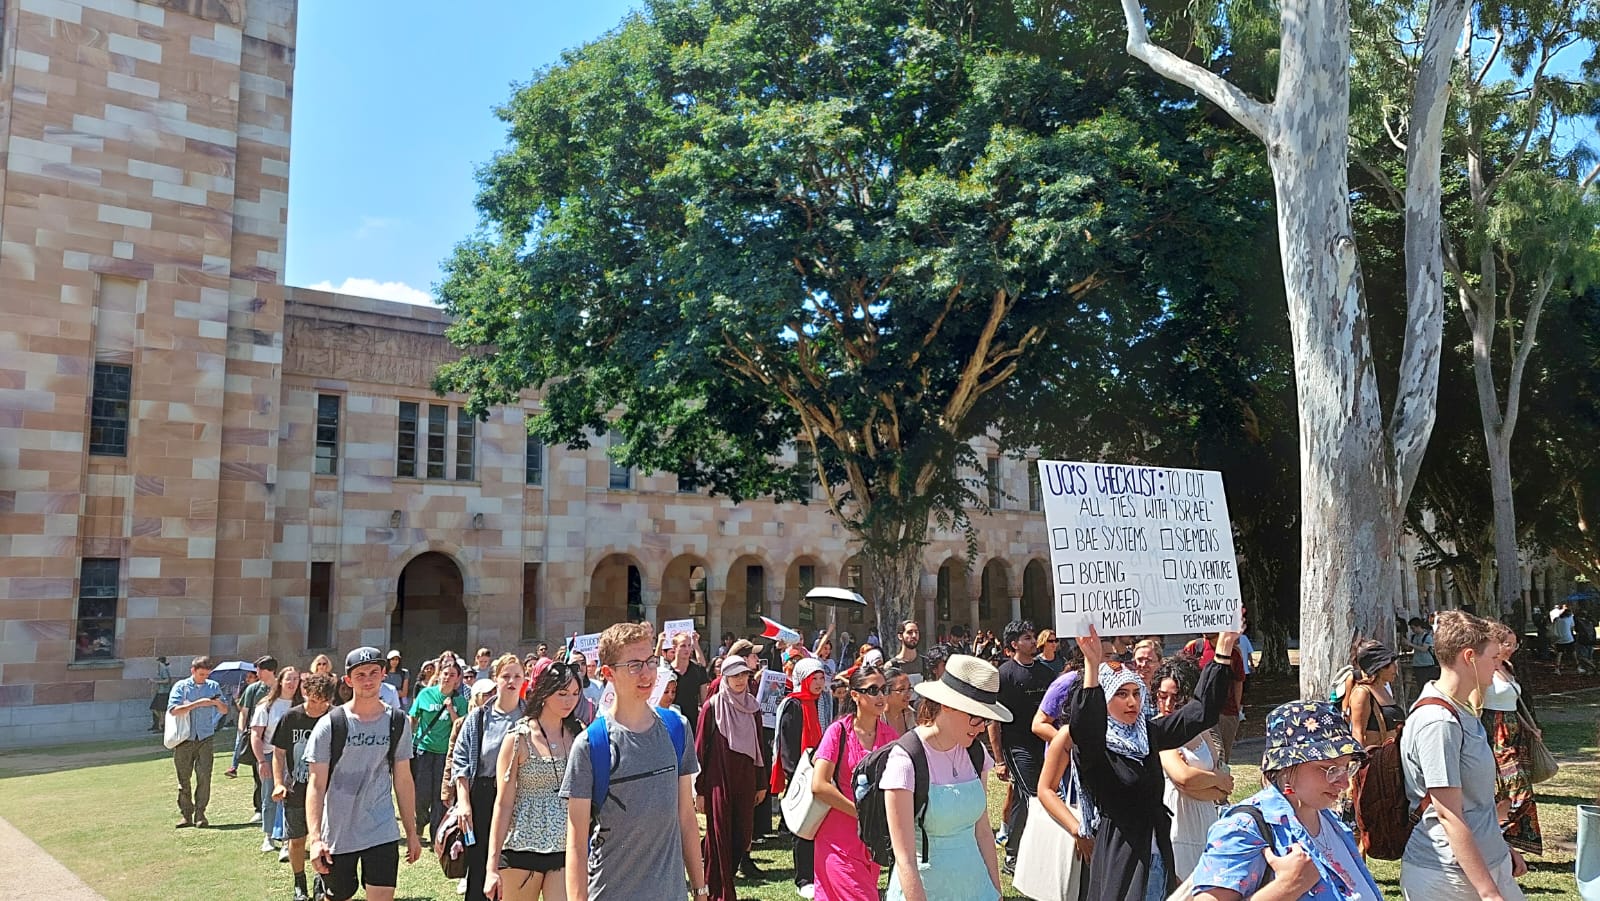 More from the UQ student protest